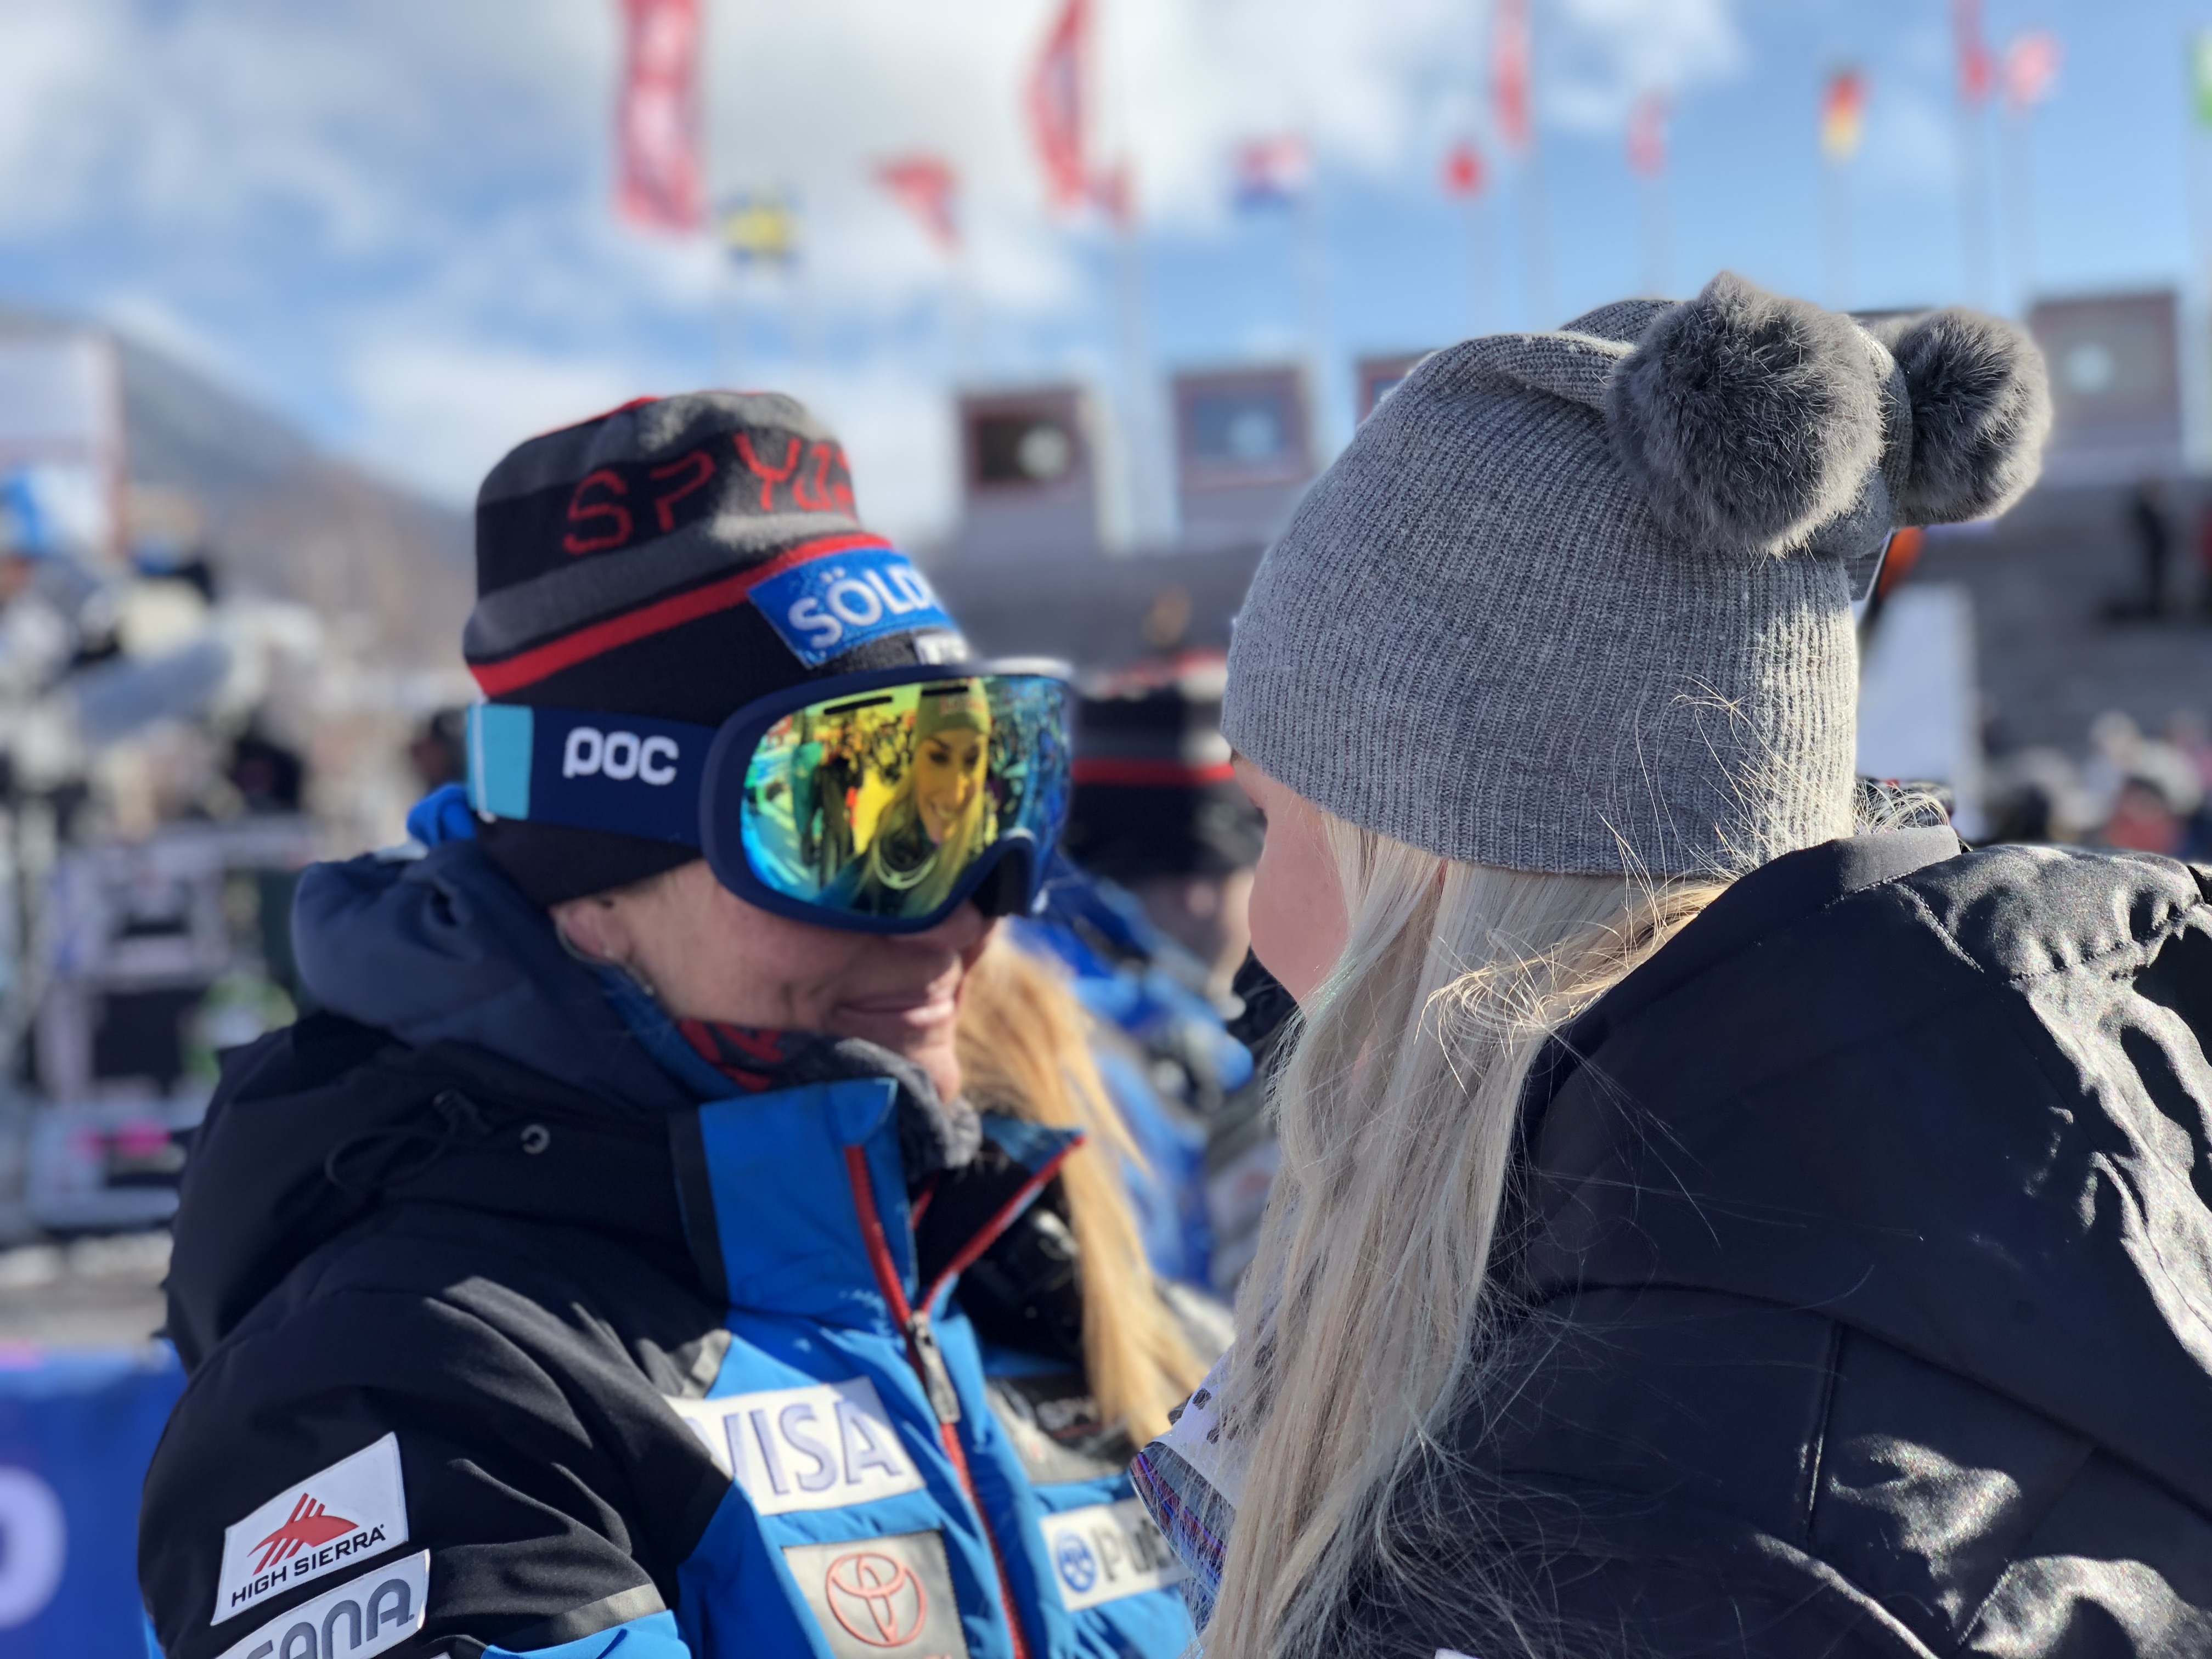 Karin Harjo chats with Lindsey Vonn after Vonn's 82nd career win in Are, Sweden. 